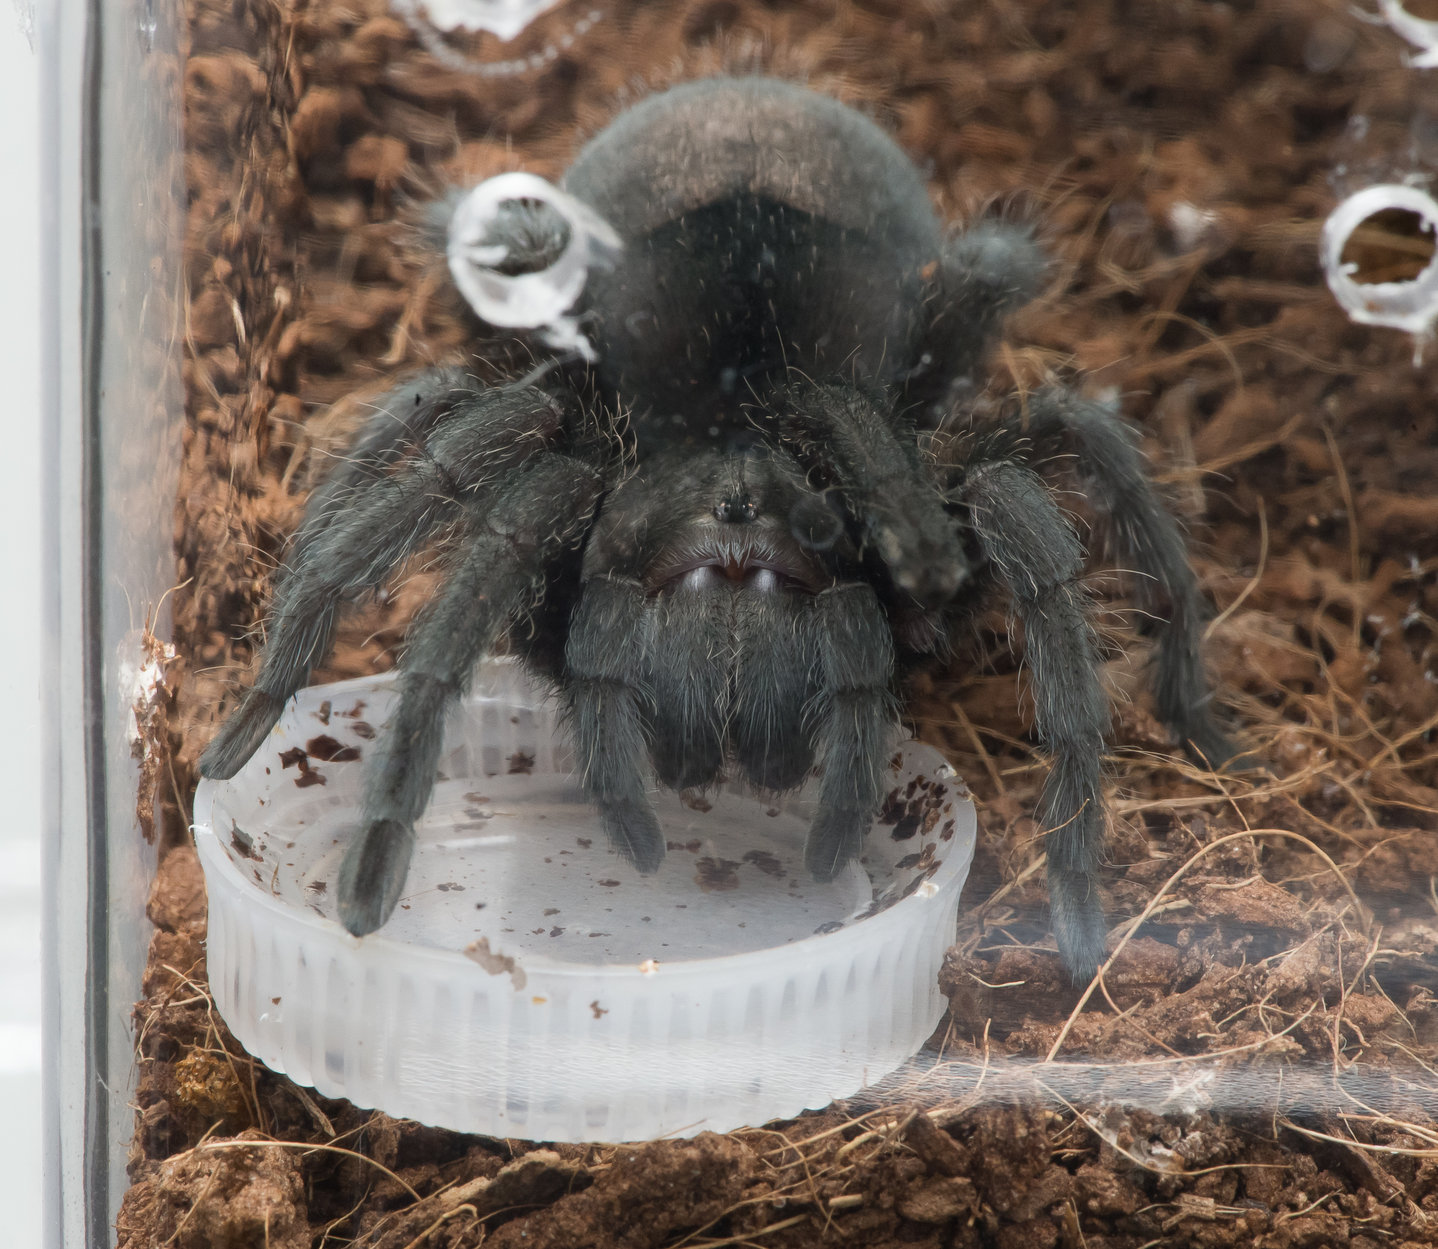 G. pulchra going for a drink